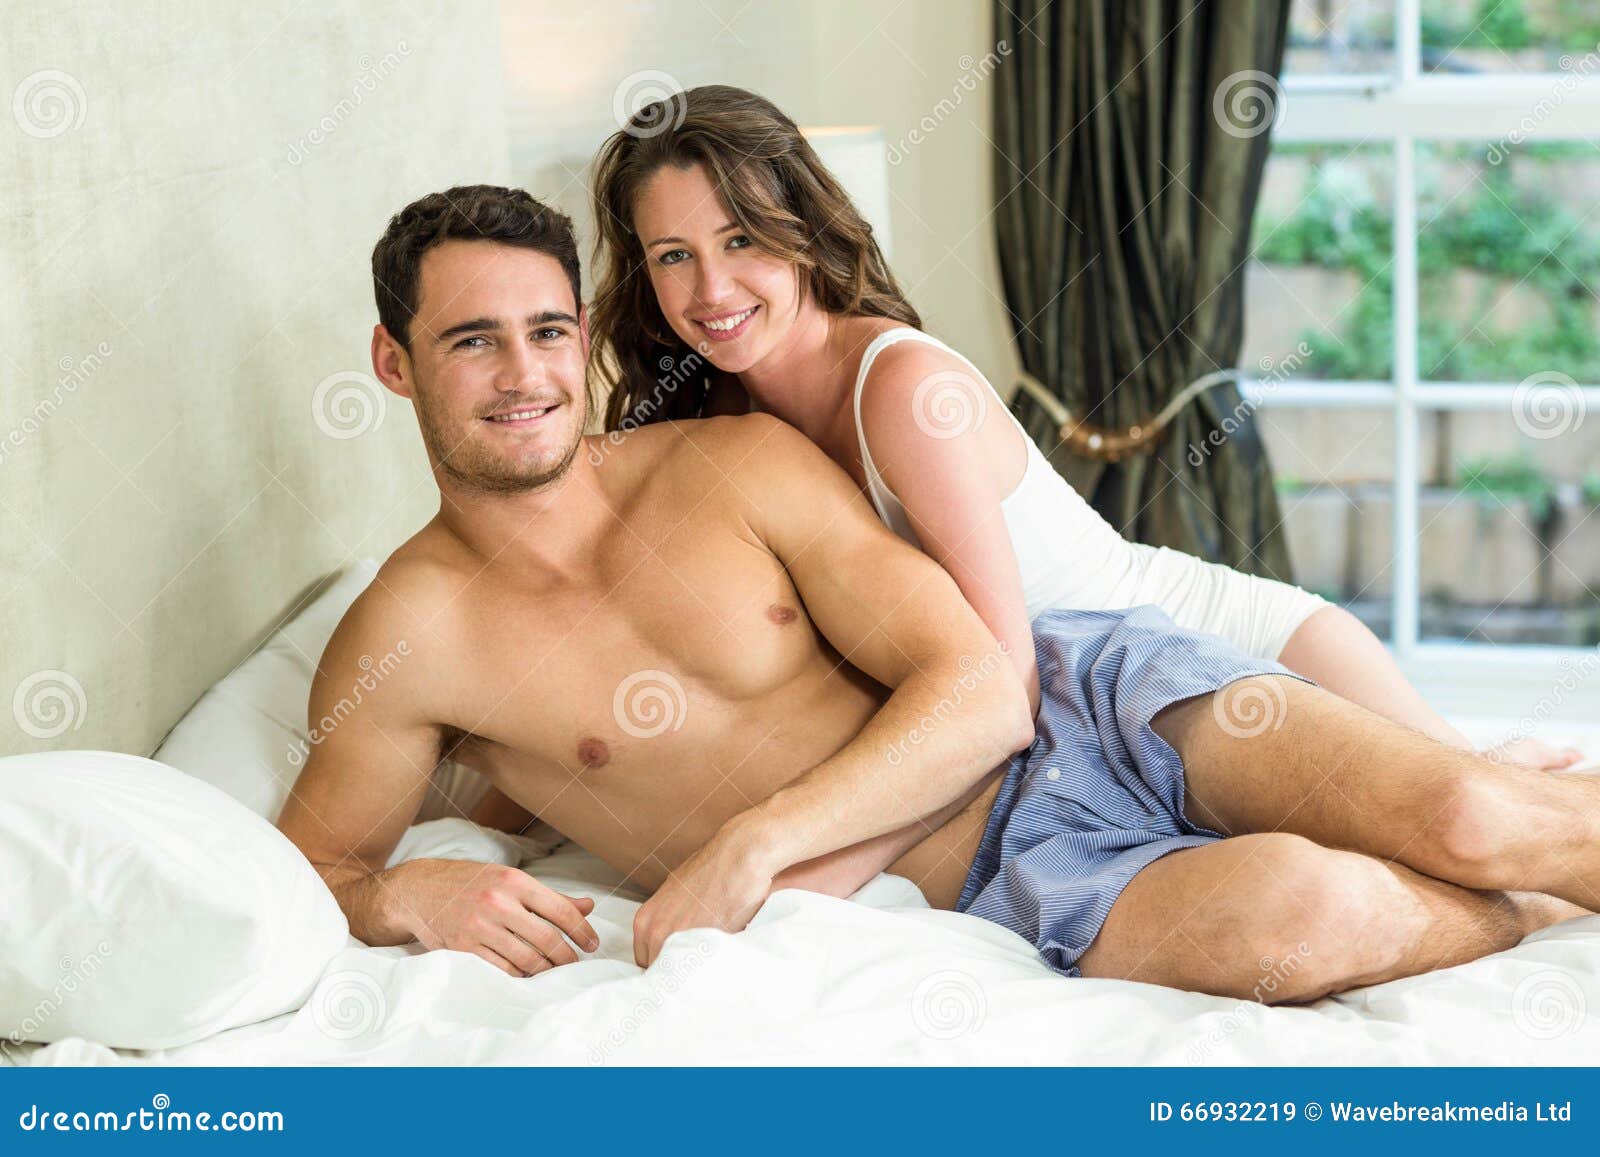 desmond gomes recommends pictures of couples cuddling in bed pic